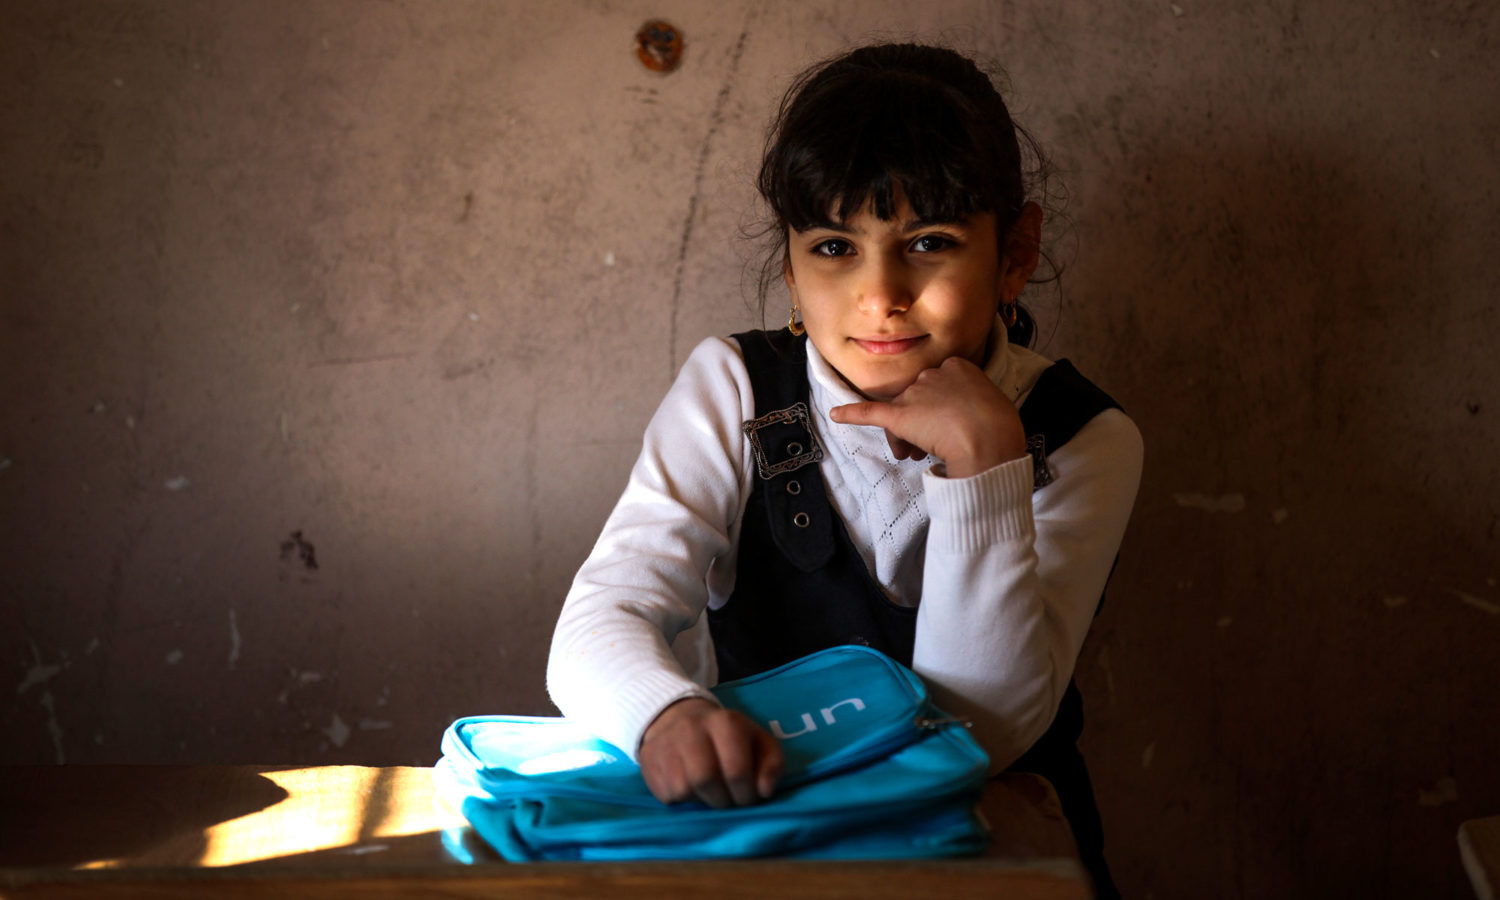 Janna, 8, from Baghdad, sits in a classroom with her new Unicef school bag after a school supply distribution for children from five schools in Baghdad's Al-Amiriyah District.